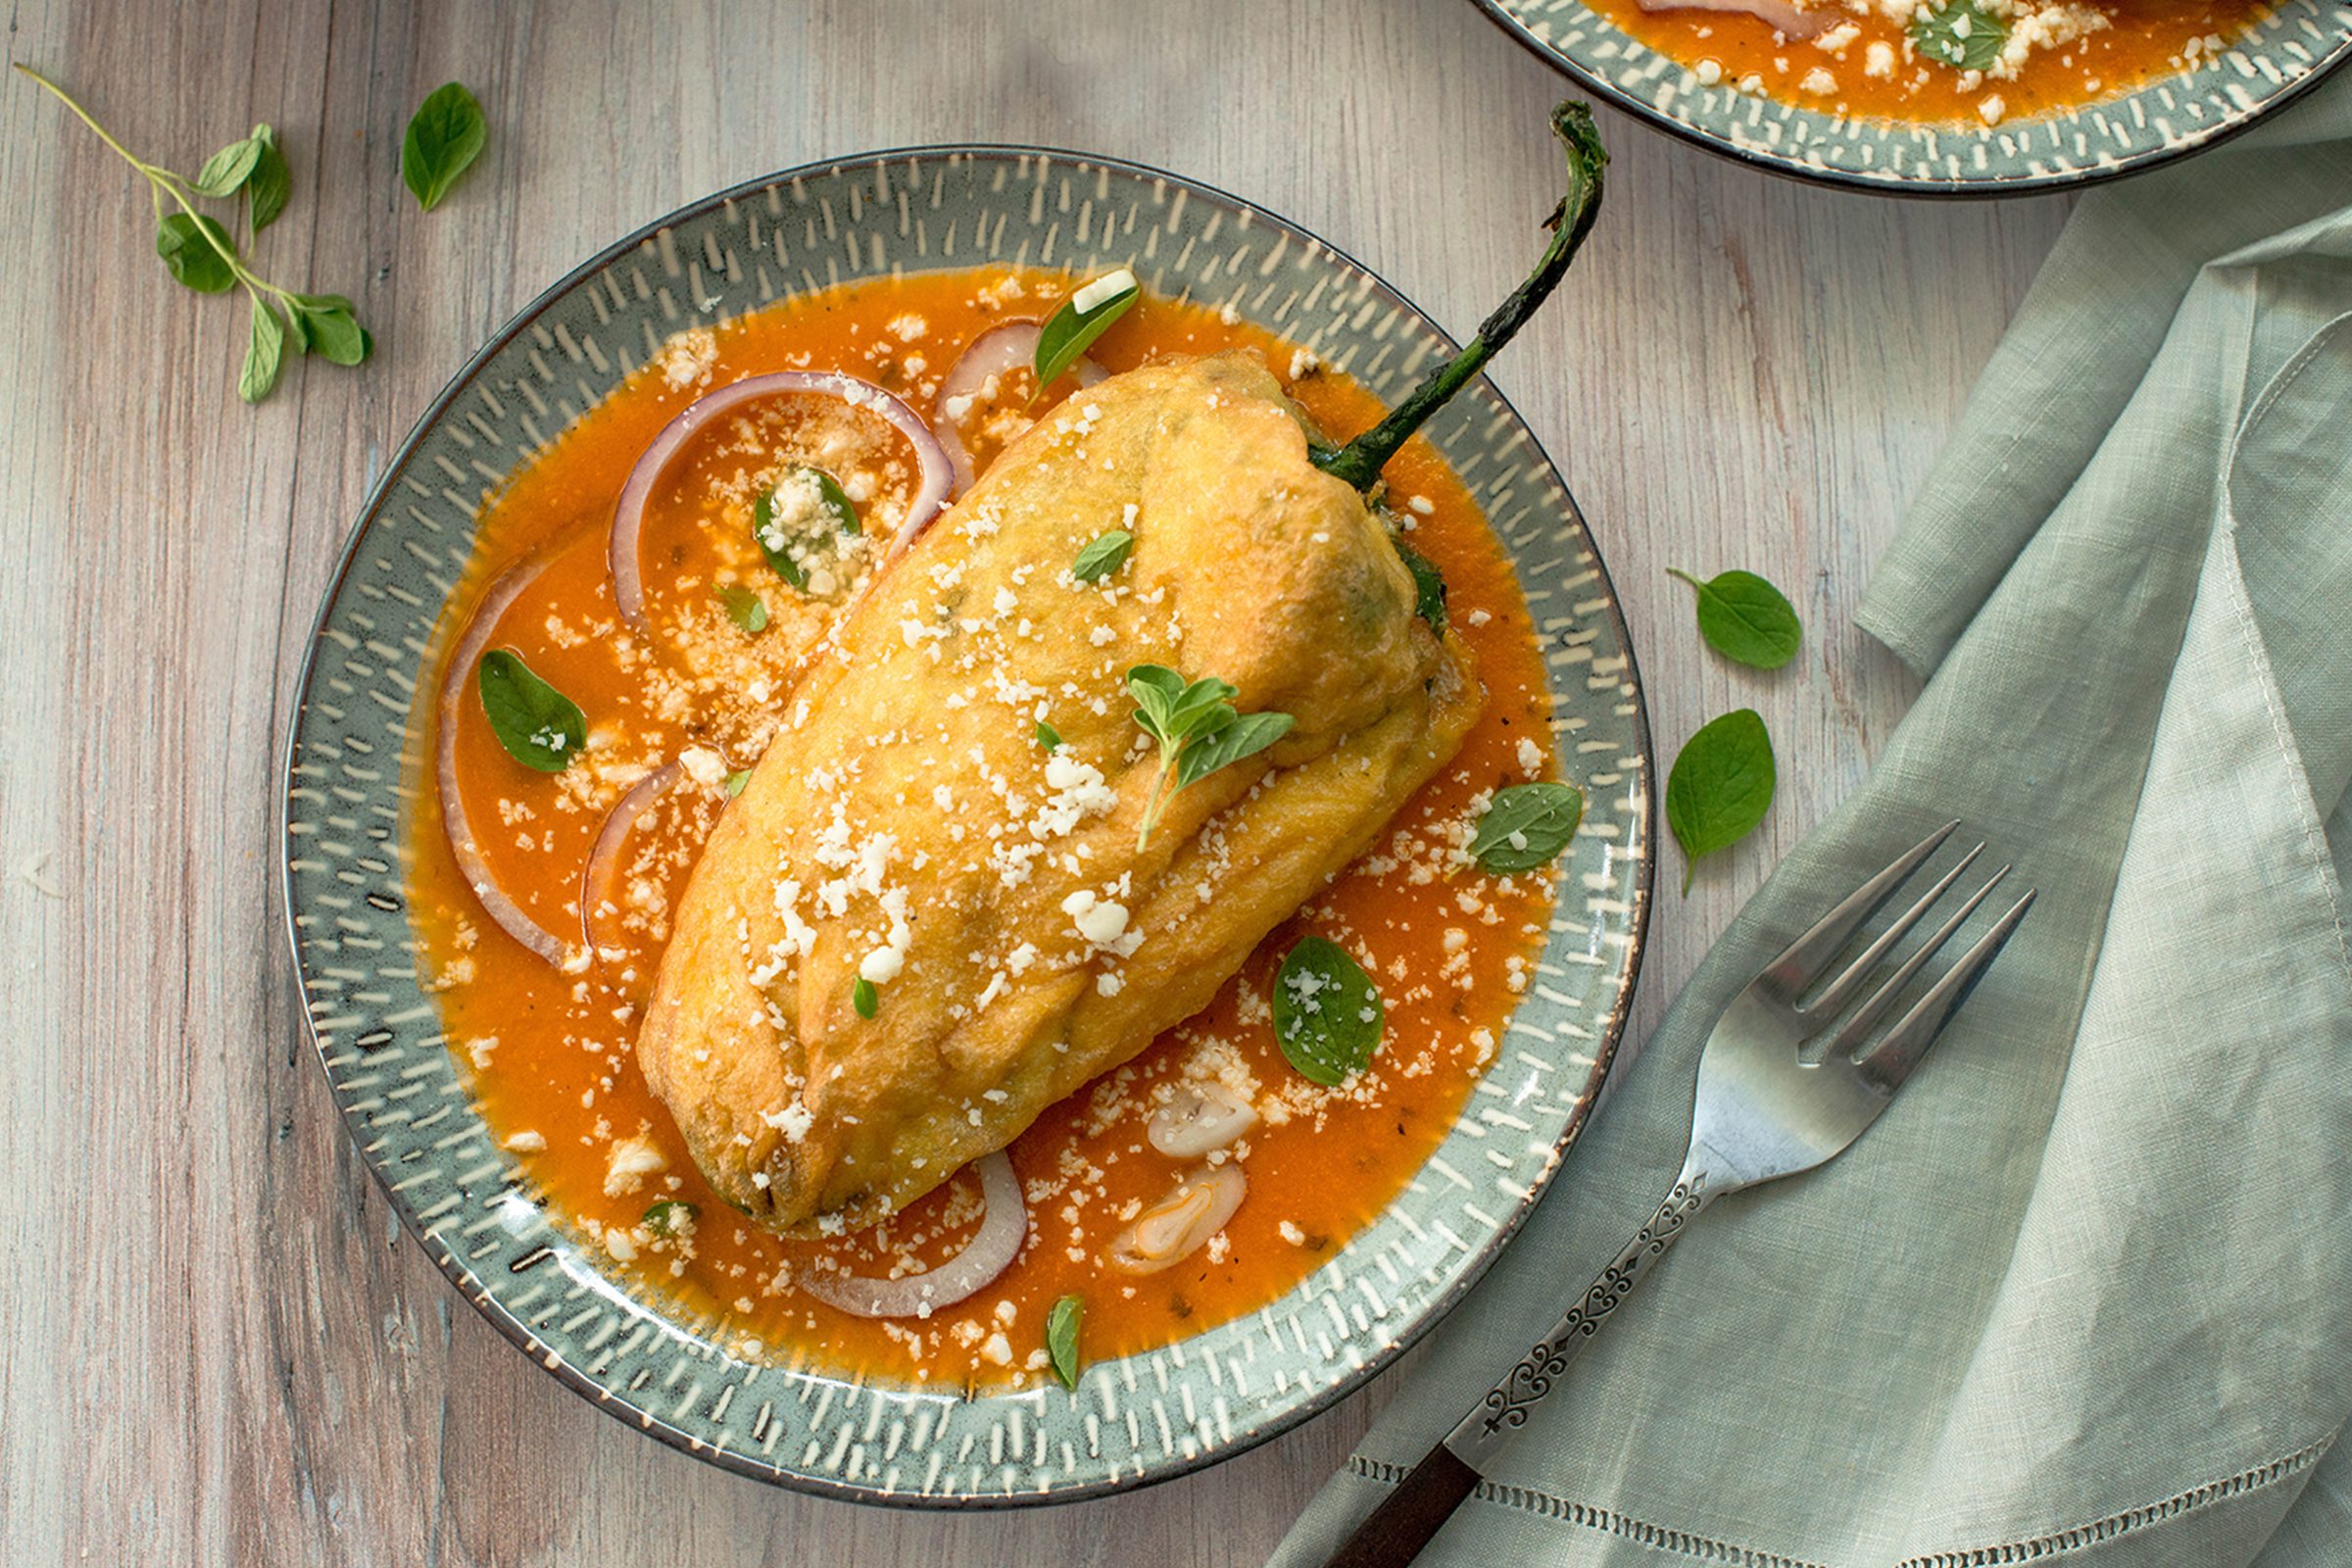 How to Make Chiles Rellenos: Step-by-Step Guide